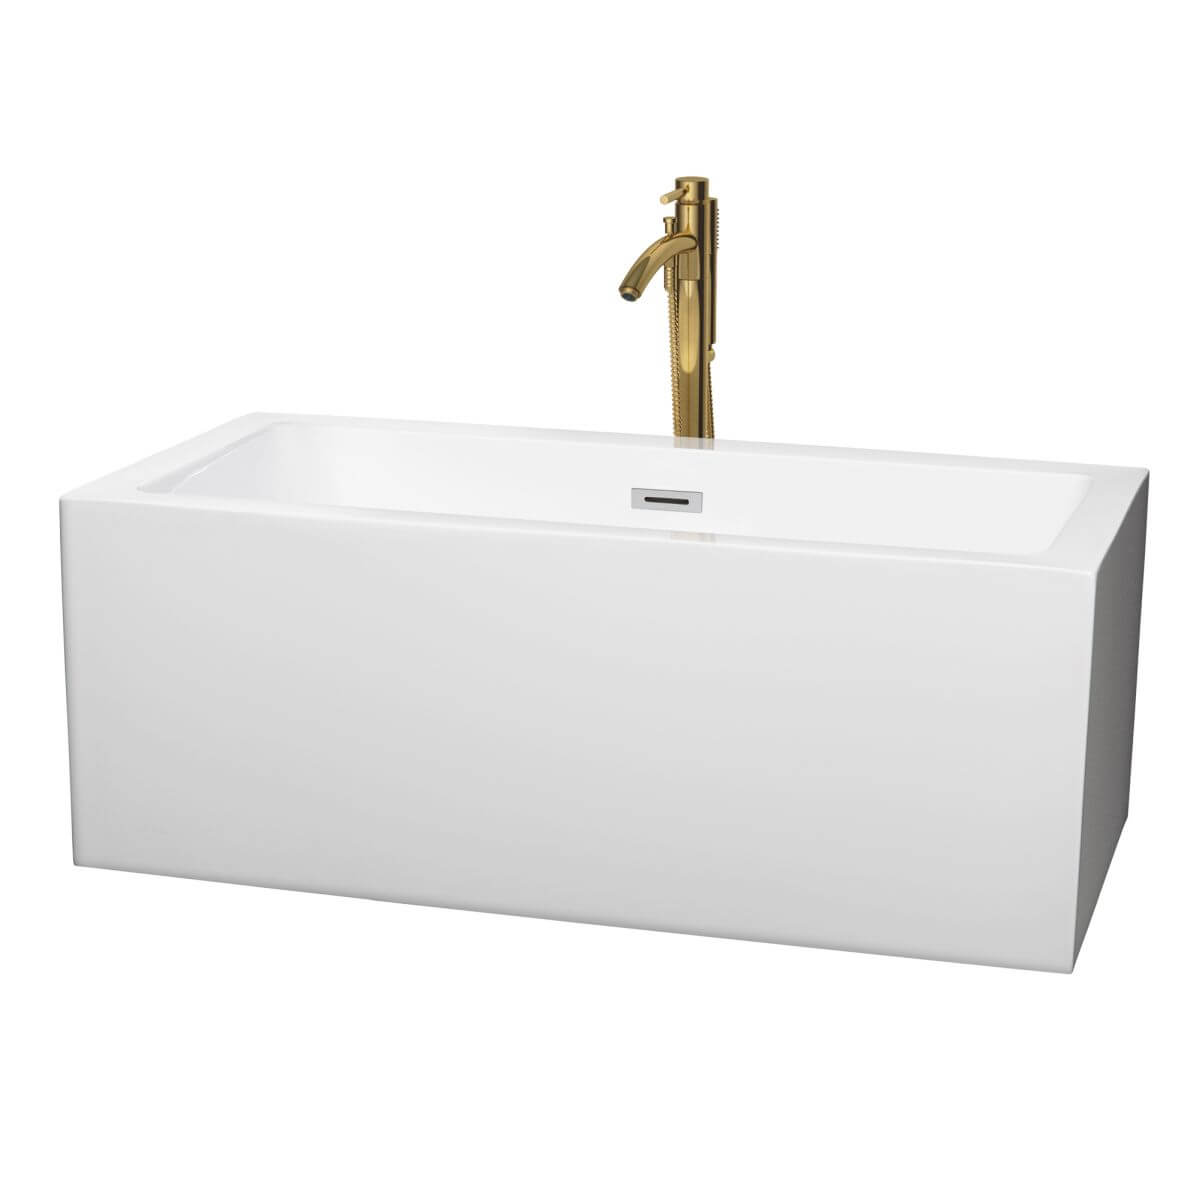 Wyndham Collection Melody 60 inch Freestanding Bathtub in White with Polished Chrome Trim and Floor Mounted Faucet in Brushed Gold - WCOBT101160PCATPGD